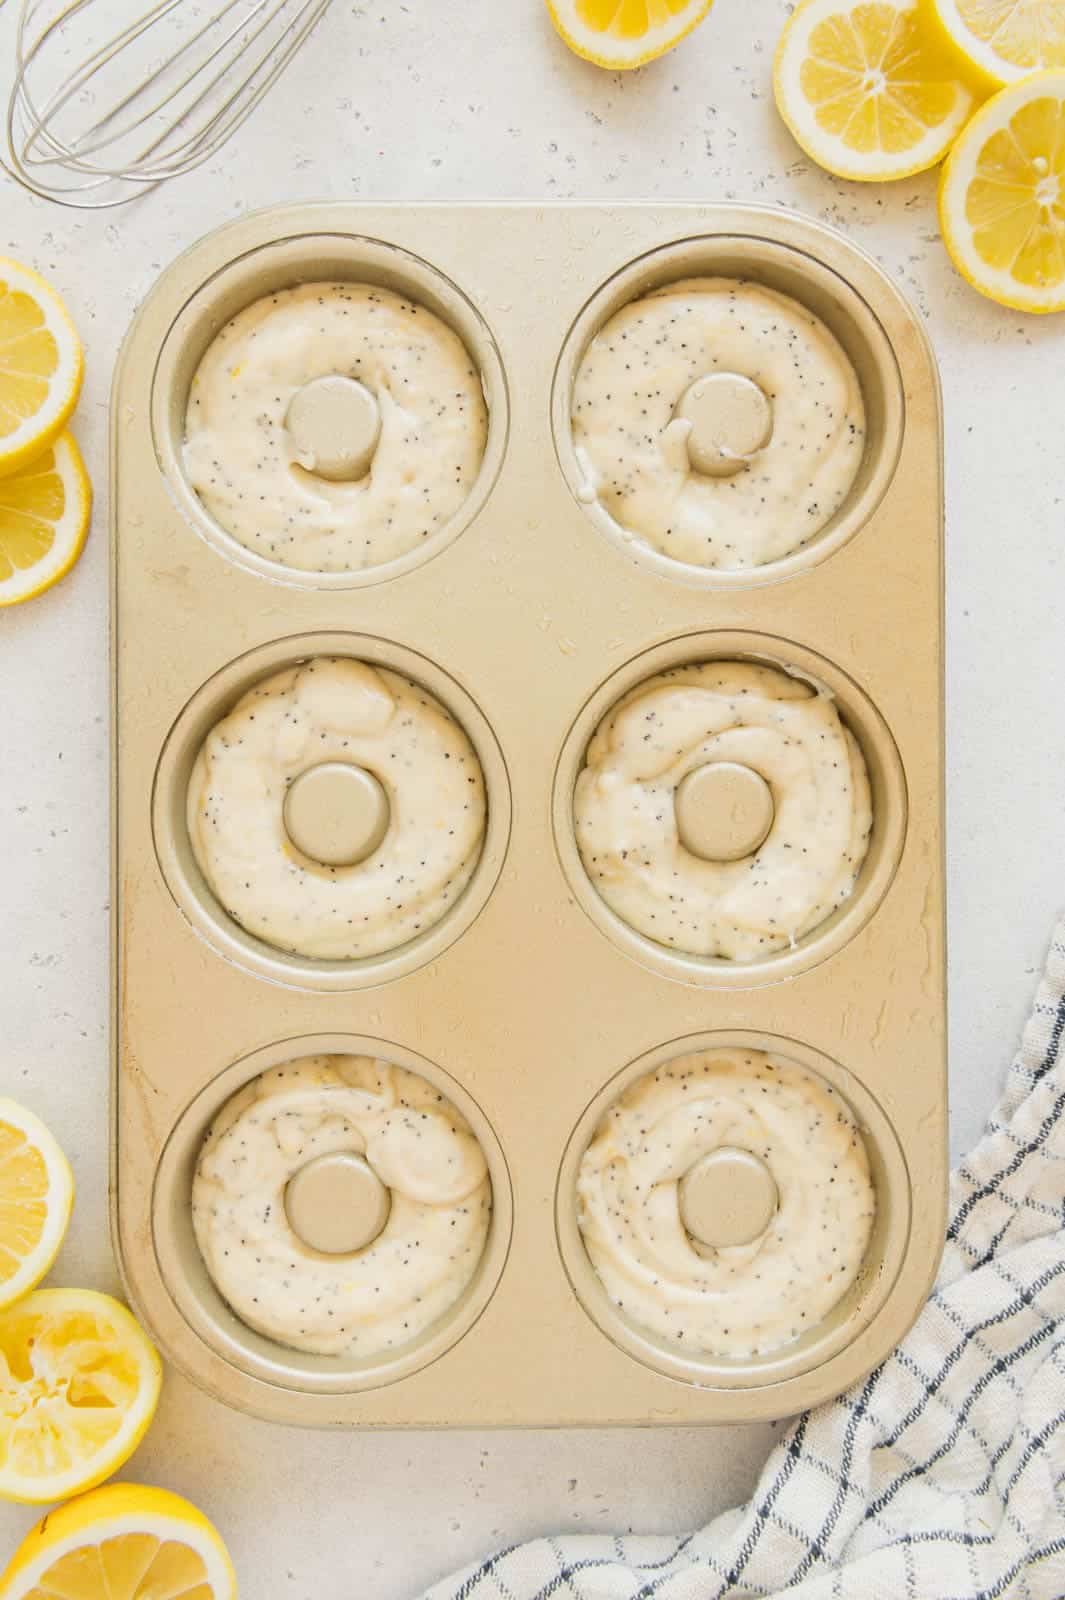 Lemon donuts in a donut baking tin ready to be baked.